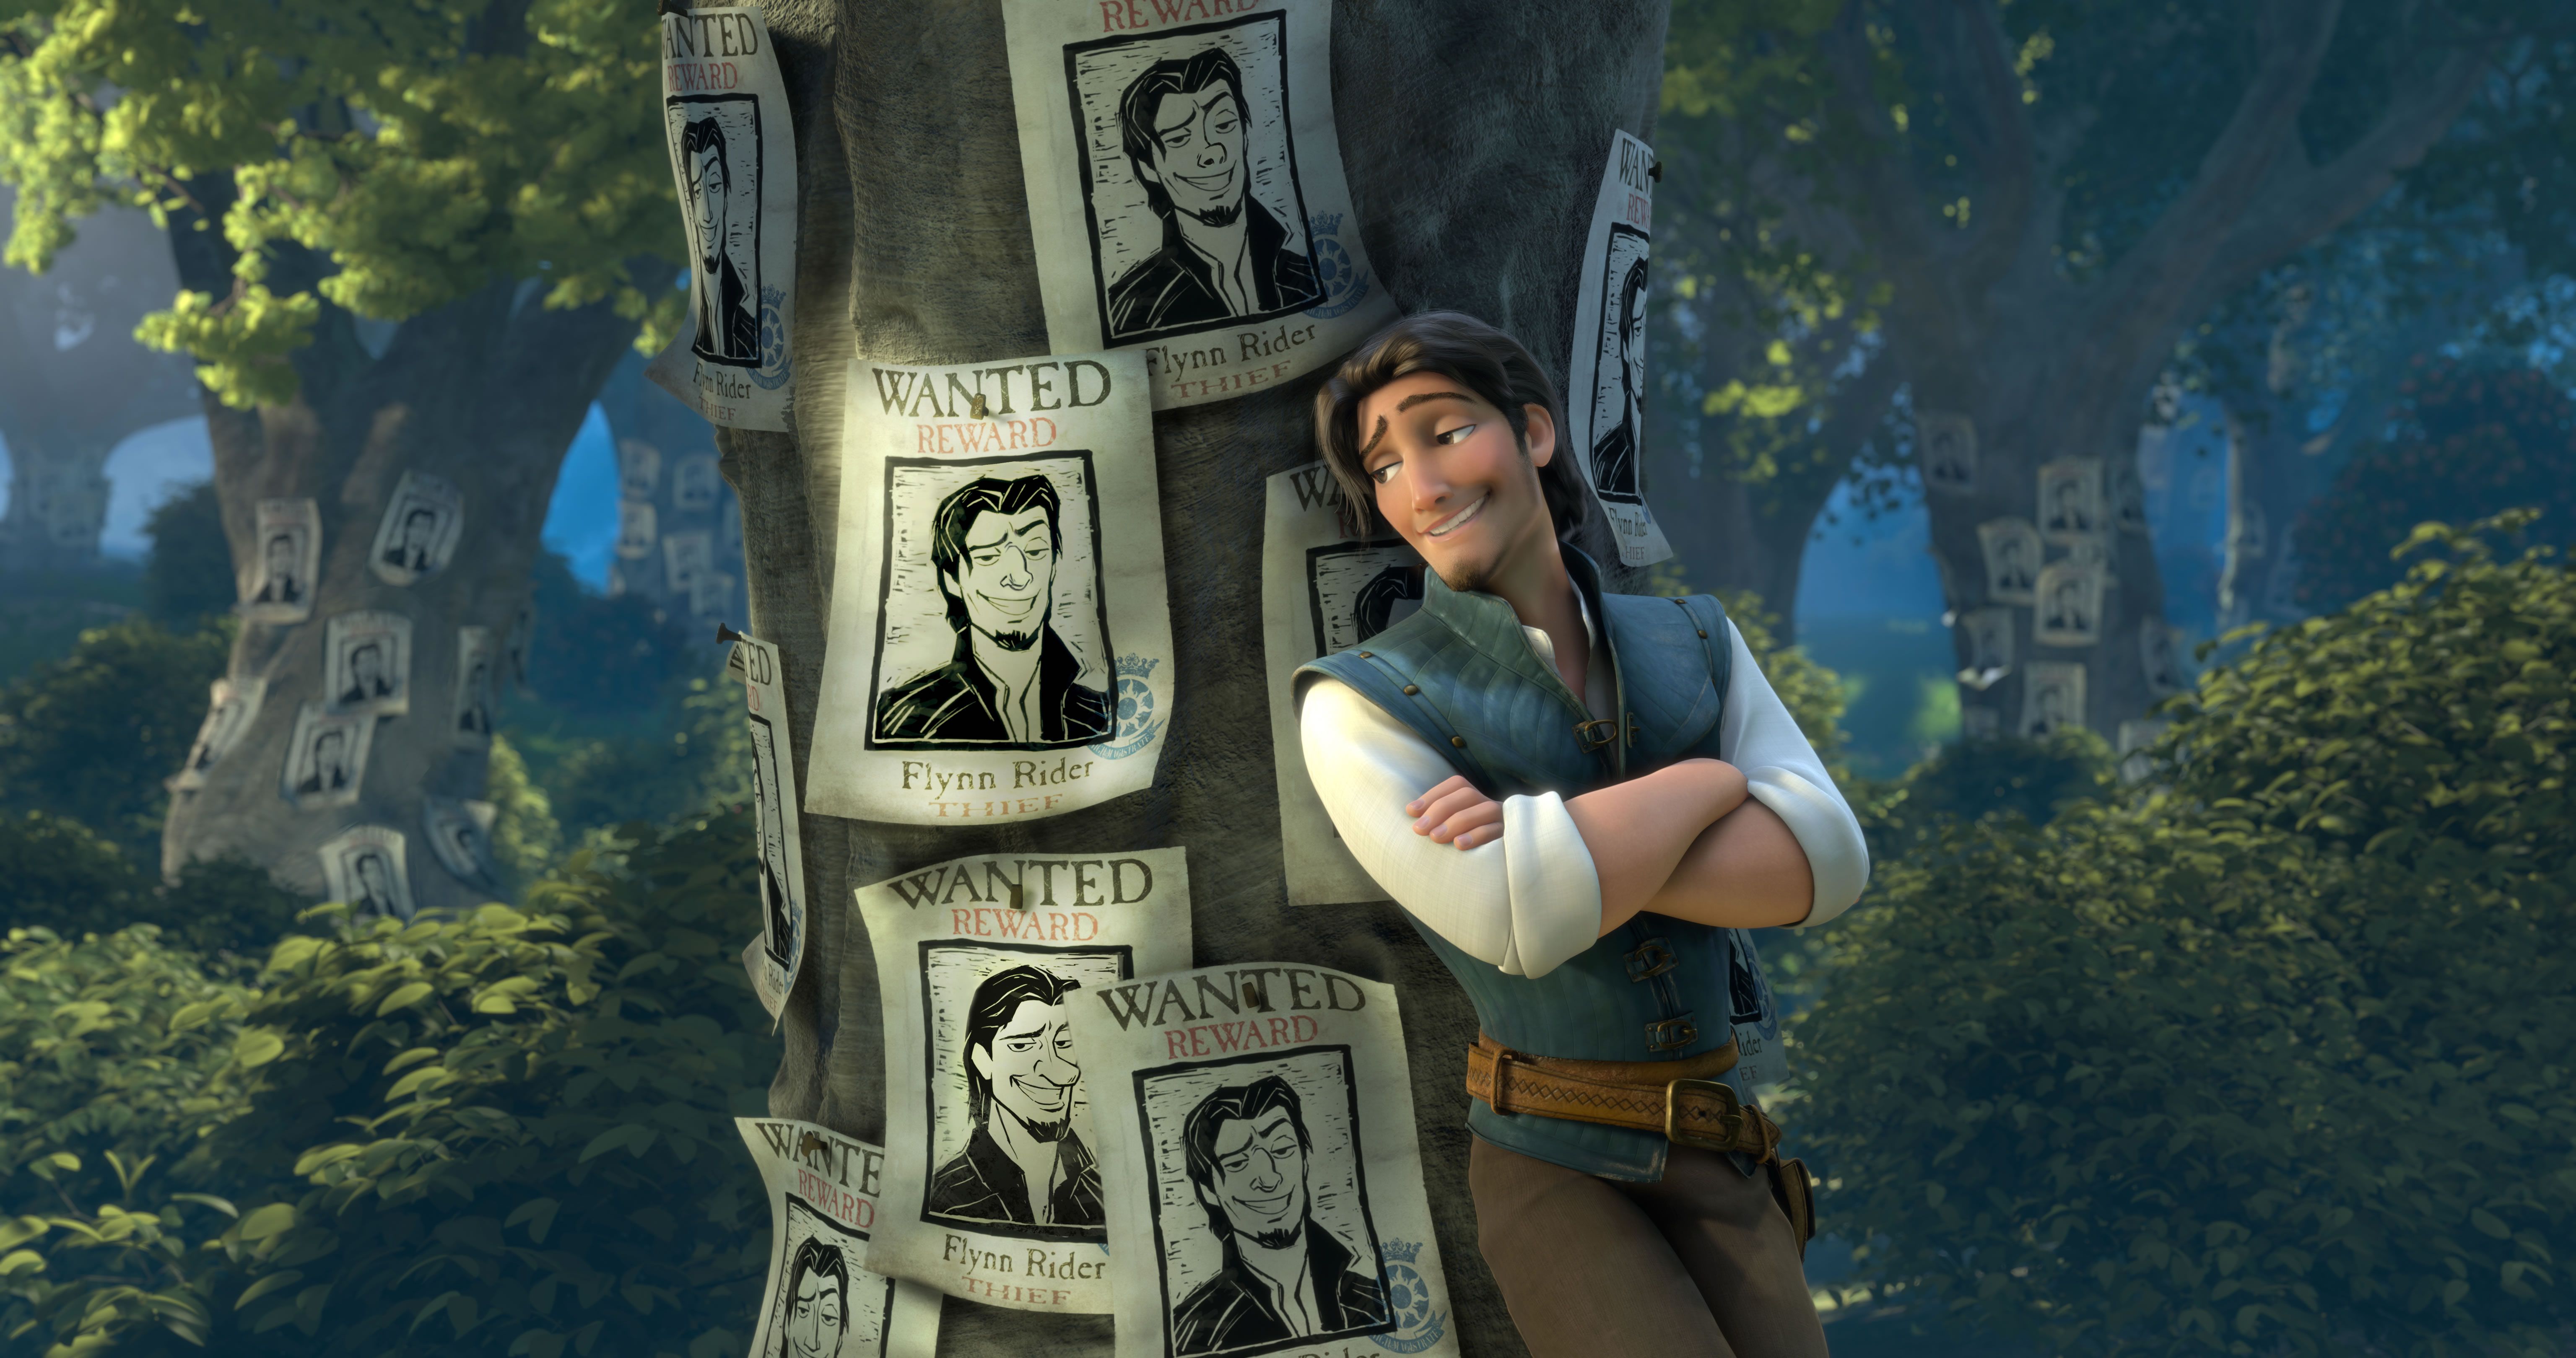 Flynn the Wanted from Disney's Movie Tangled Desktop Wallpaper